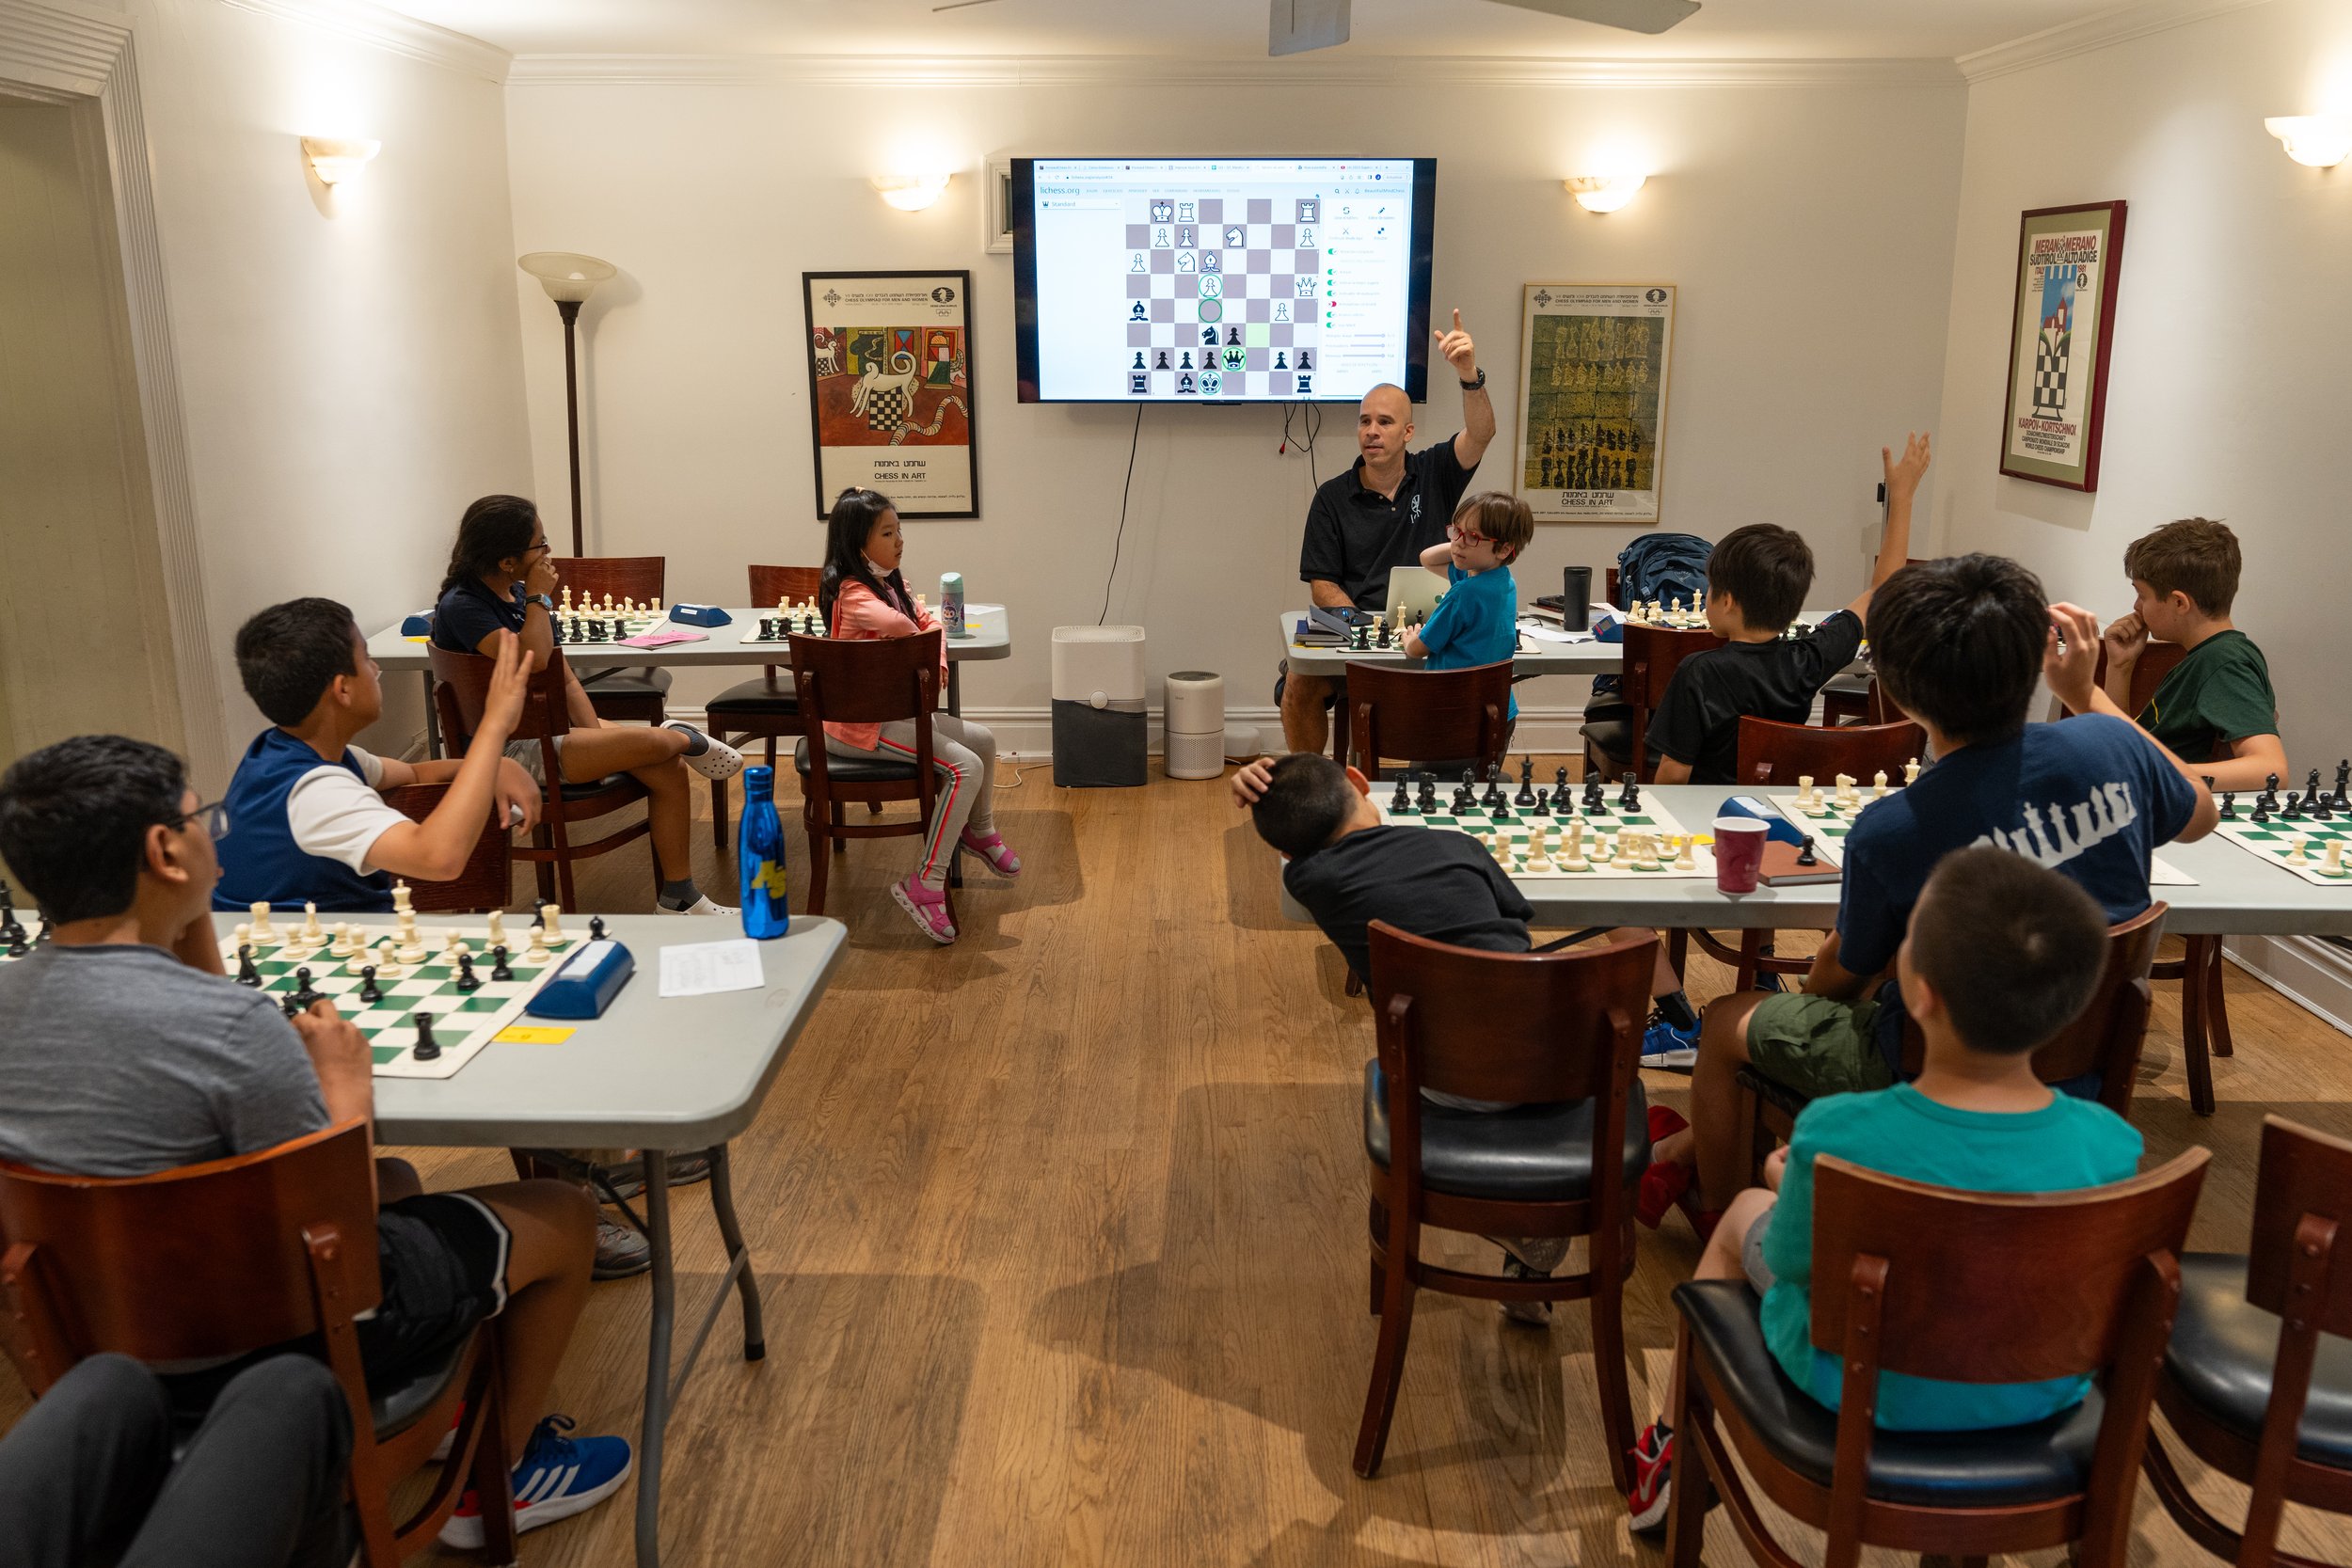 About Us  Chess school in Central Houston